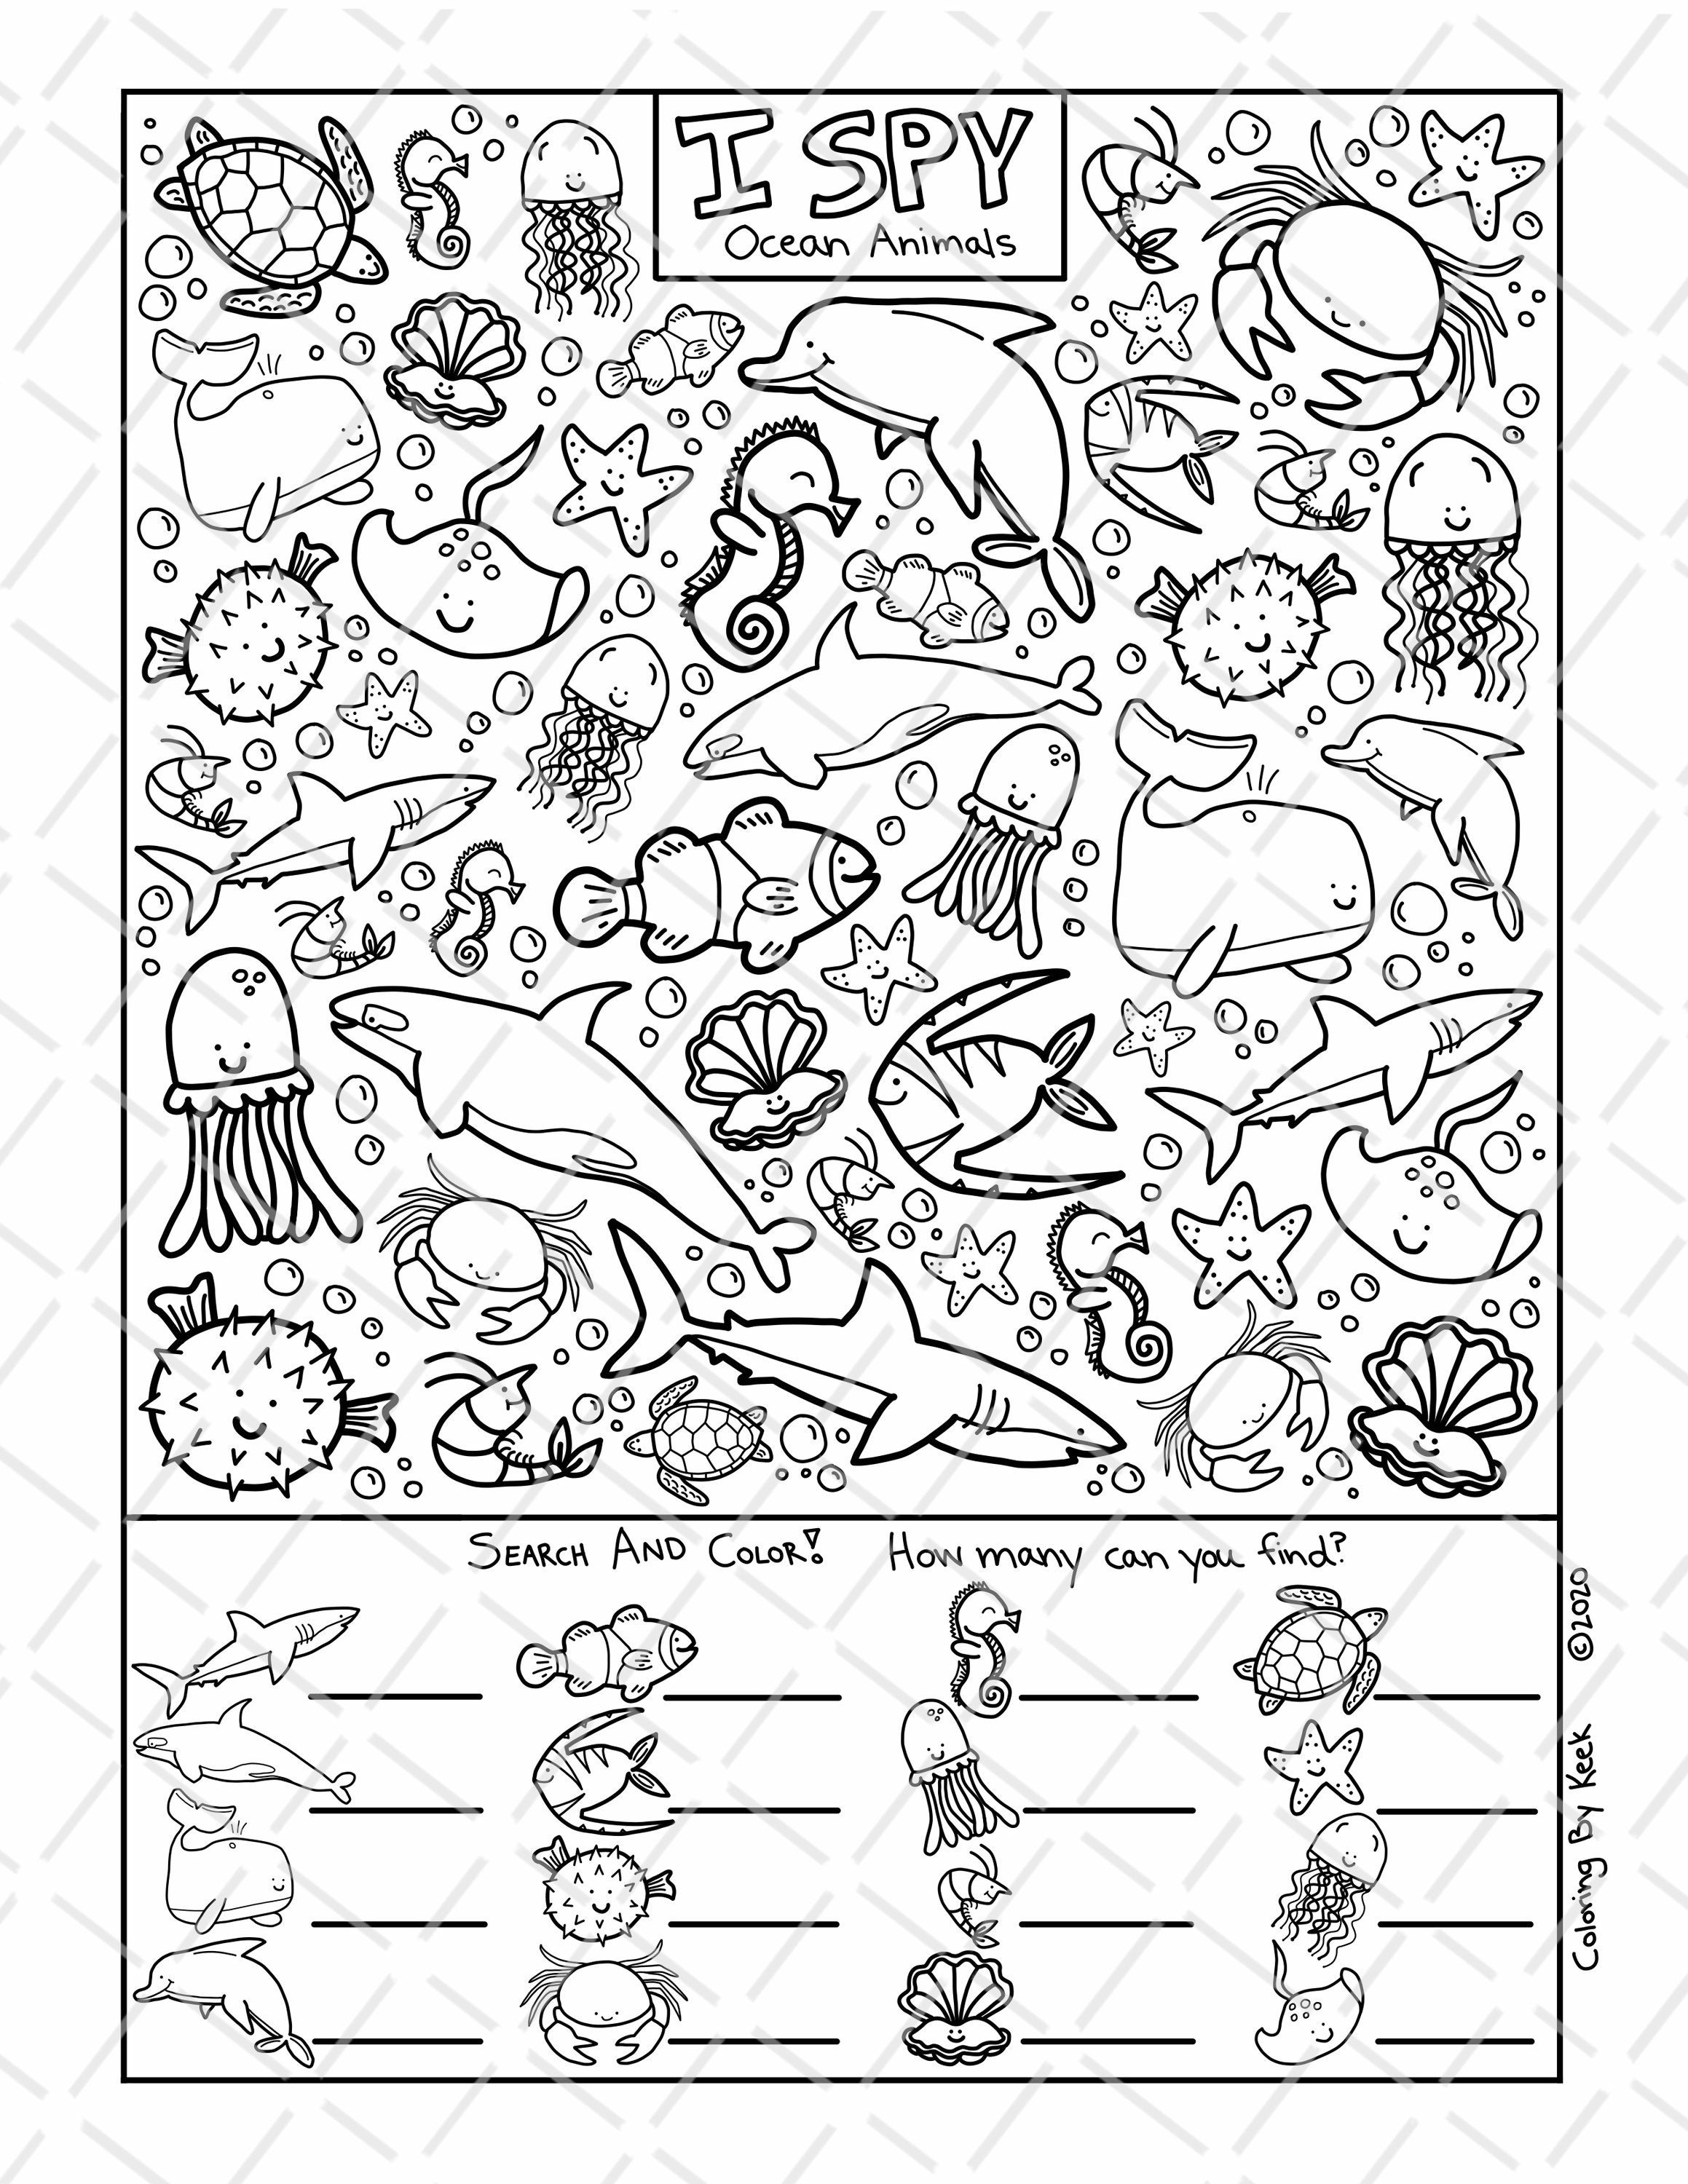 i-spy-coloring-pages-free